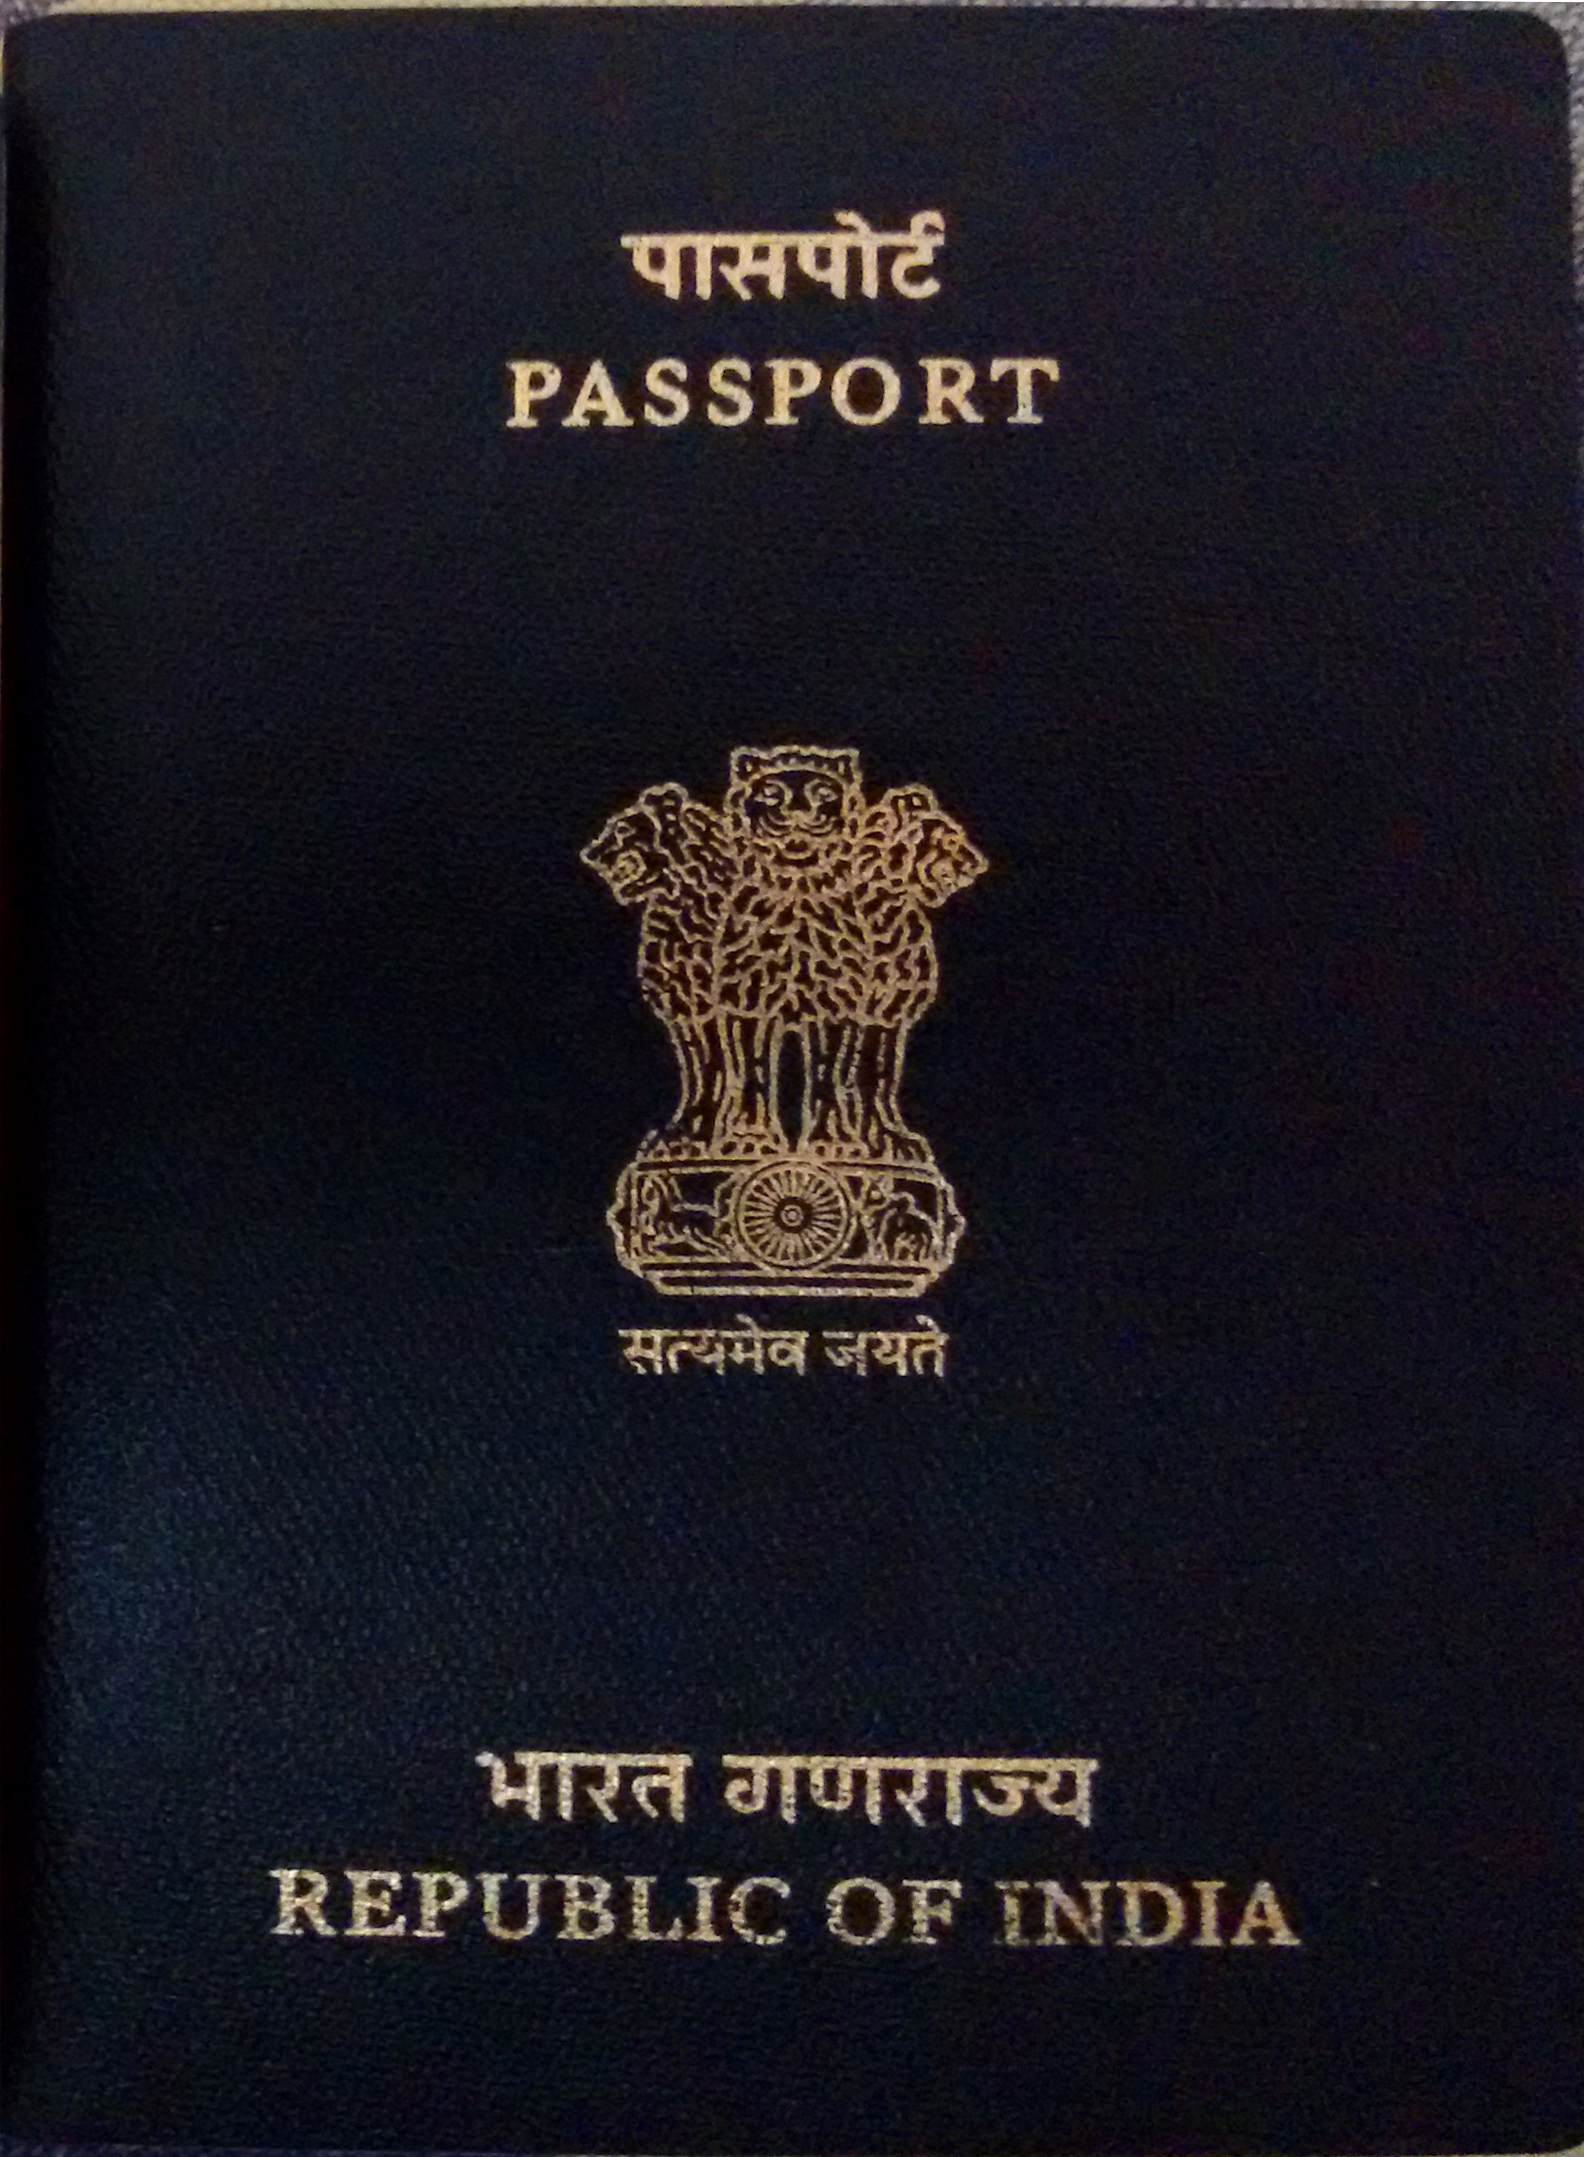 Here is how to link your Passport to your Covid-19 vaccine certificate in India